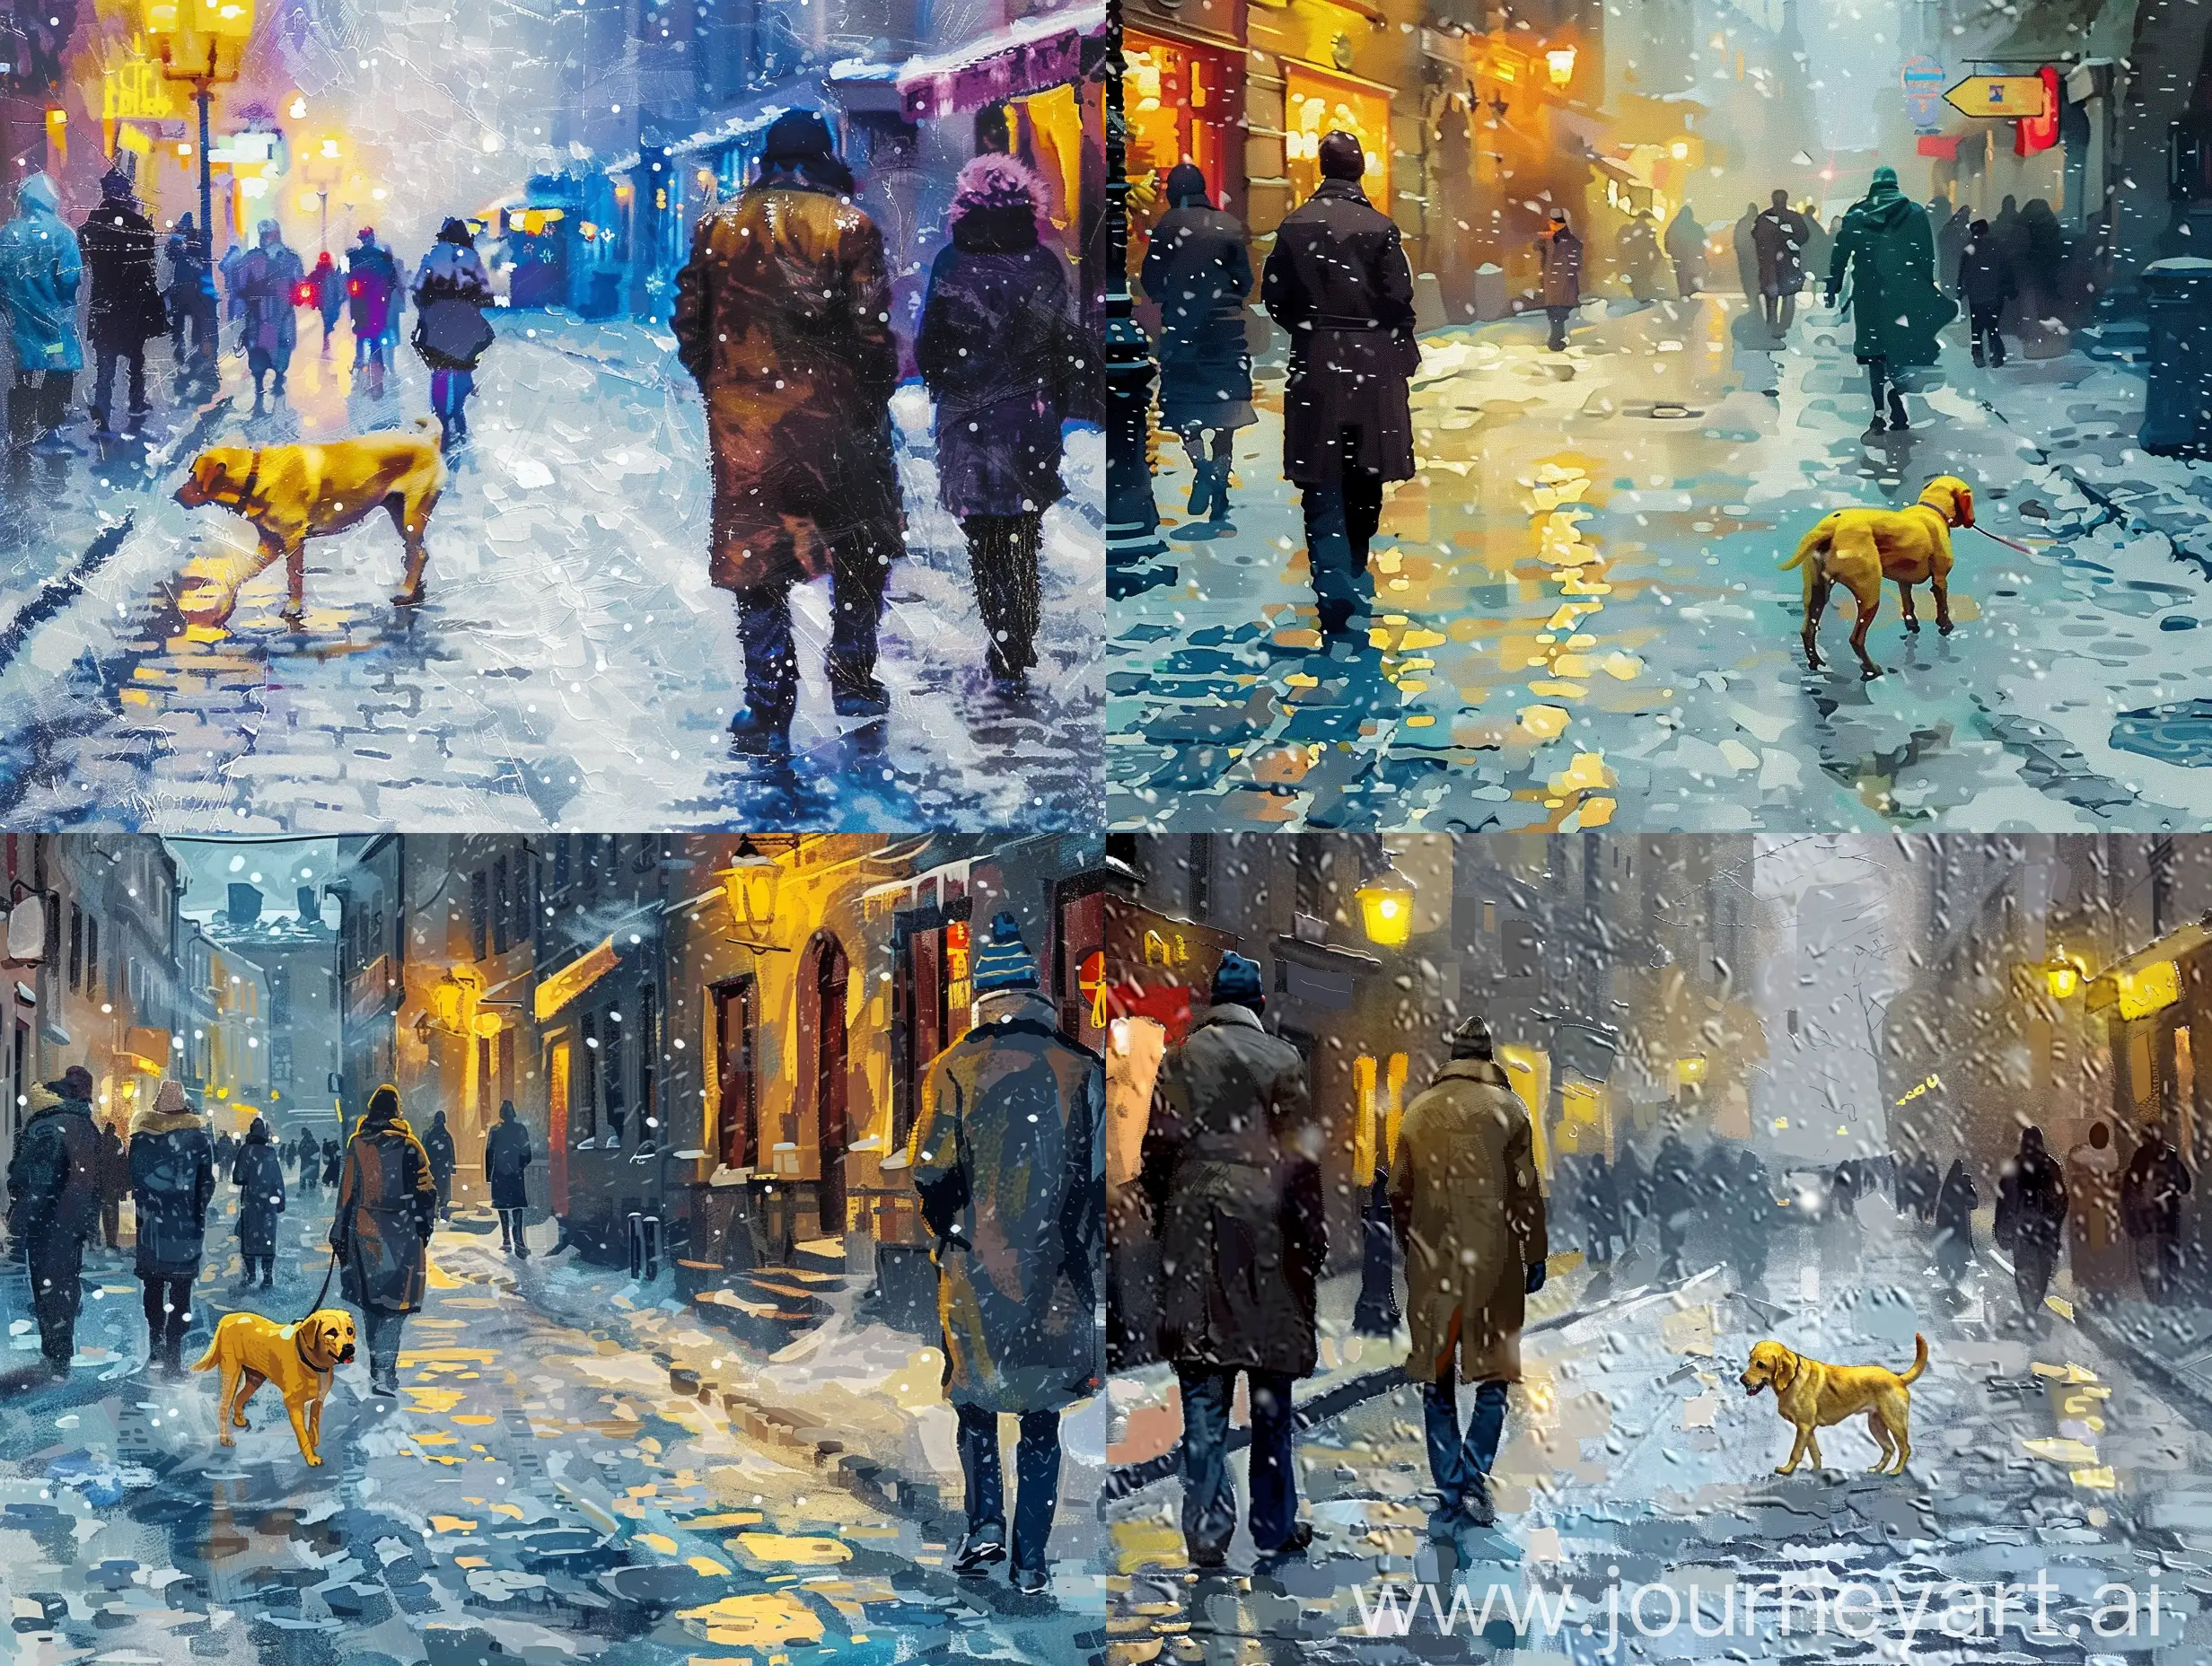 snowy weather, icy cobblestones, people walking in coats, a yellow dog on the street, cinematic lights and colors, painting, embossed painting style